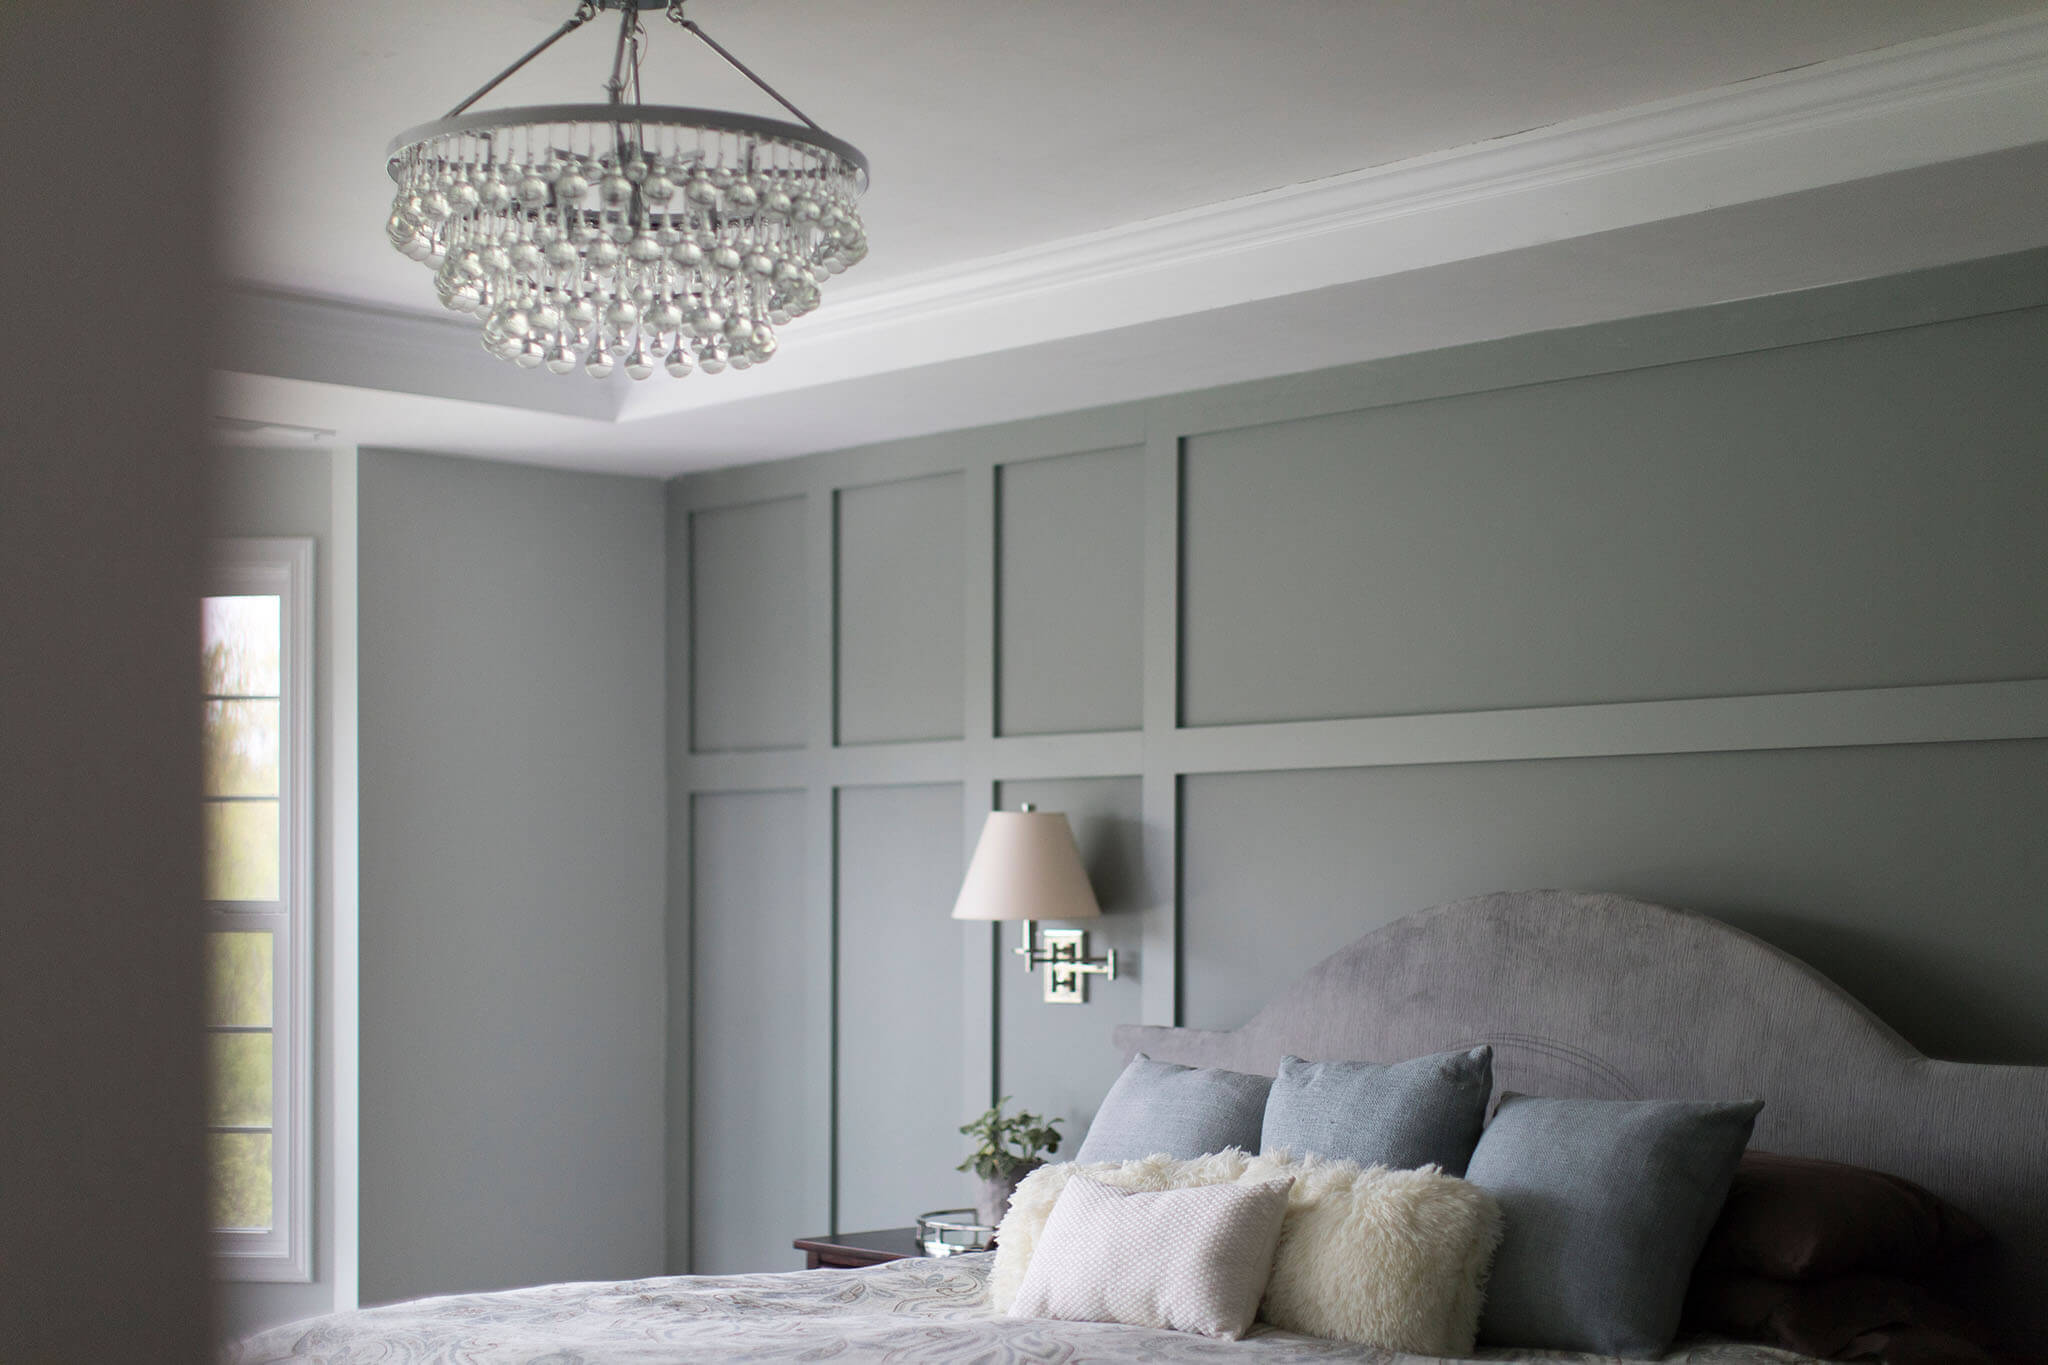 Master Bedroom after finishing touches - molding for interest on the feature wall, swing-arm sconces and chandelier. Lindsey Putzier Design Studio